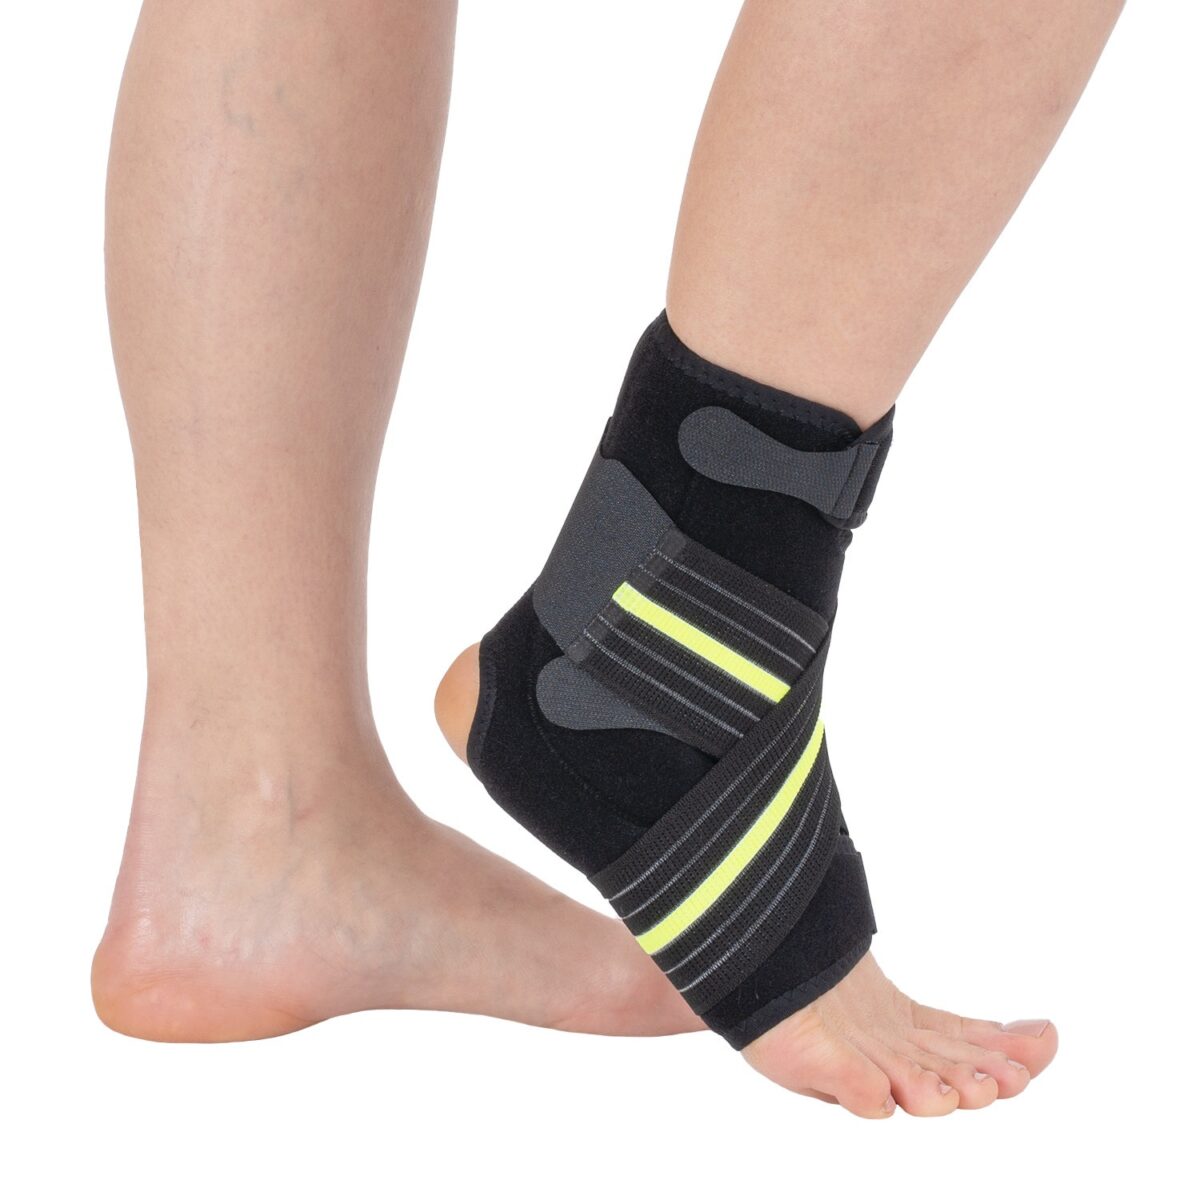 wingmed orthopedic equipments W606 ligament ankle support with 8 strap 63 1